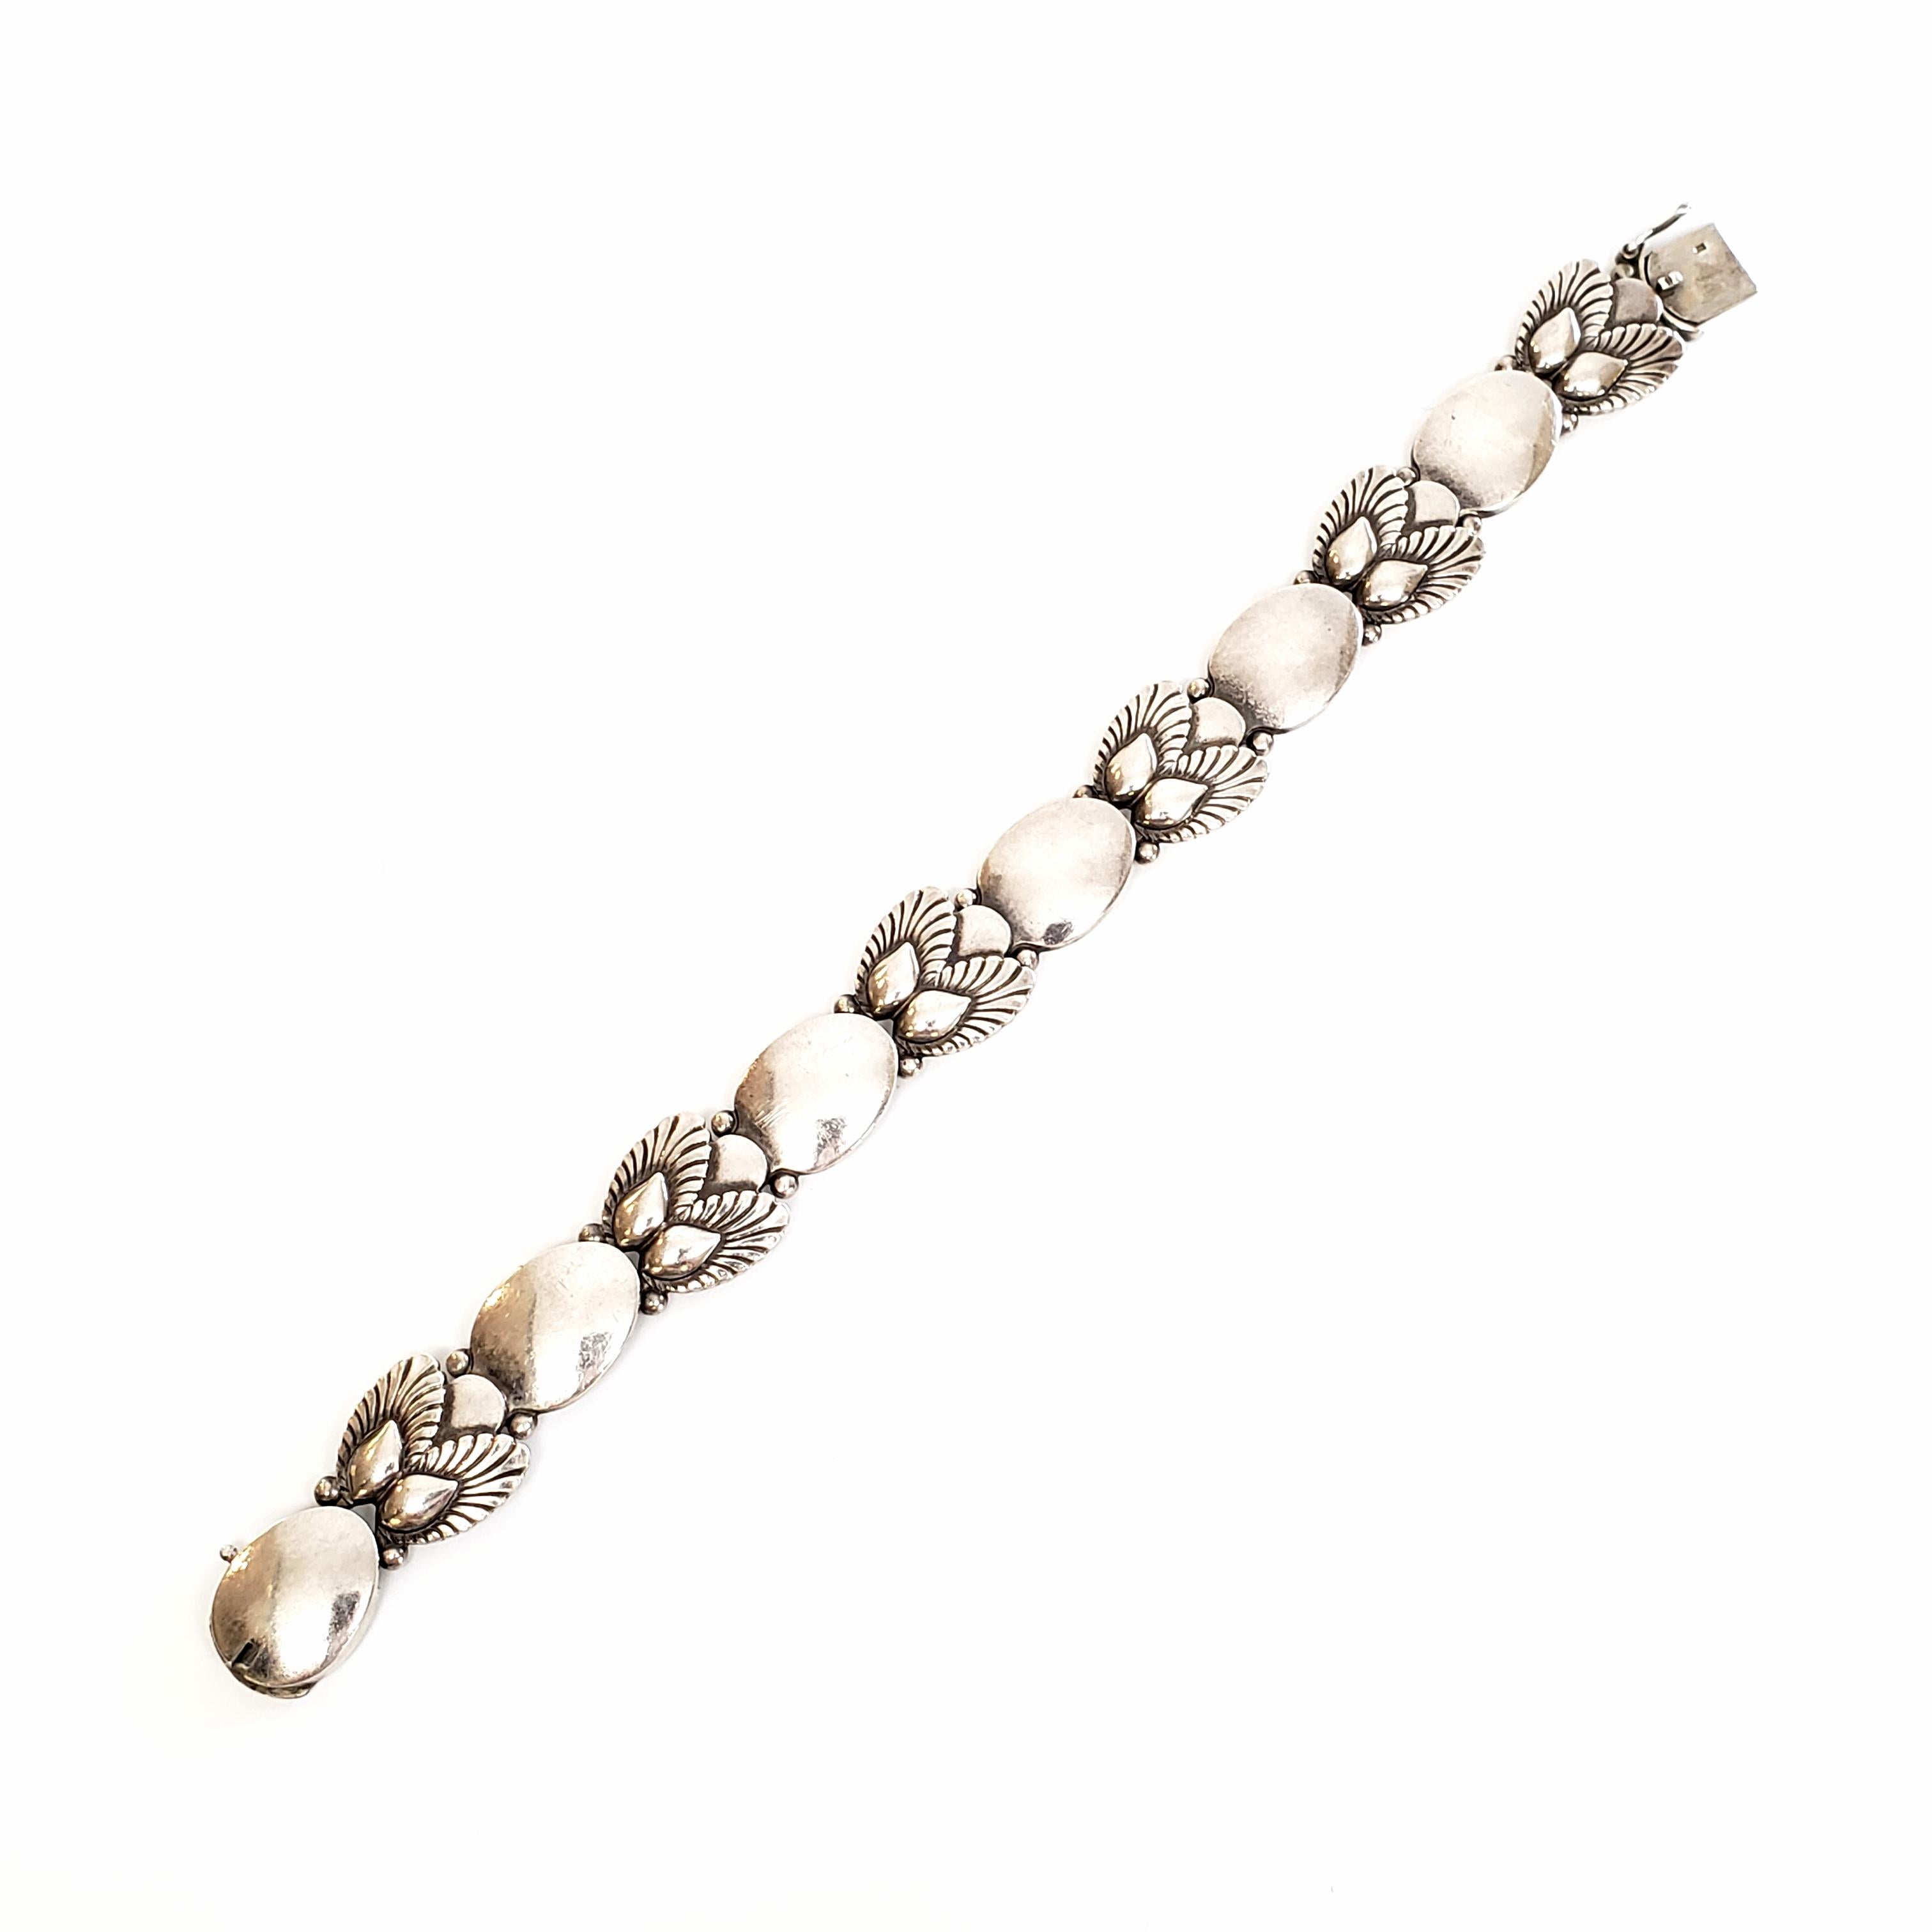 Vintage Georg Jensen sterling silver bracelet in the Bittersweet pattern, #94B, circa 1945.

The Bittersweet flatware pattern was designed by Gundorph Albertus in 1940. This bracelet is typical of Georg Jensen pieces in that it is inspired by nature